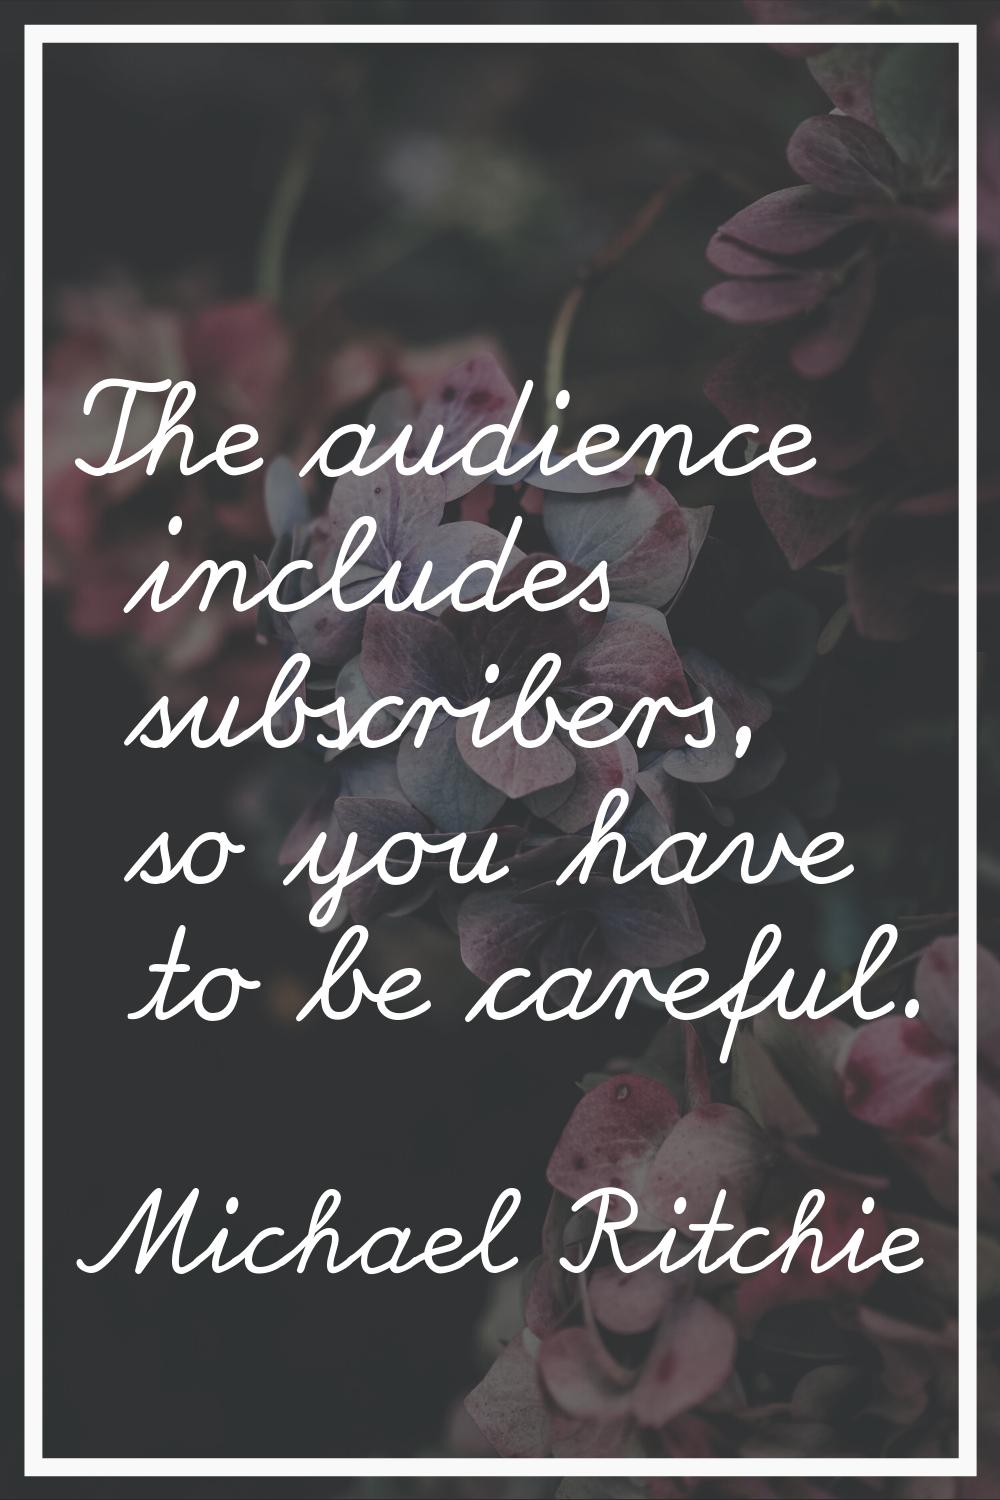 The audience includes subscribers, so you have to be careful.